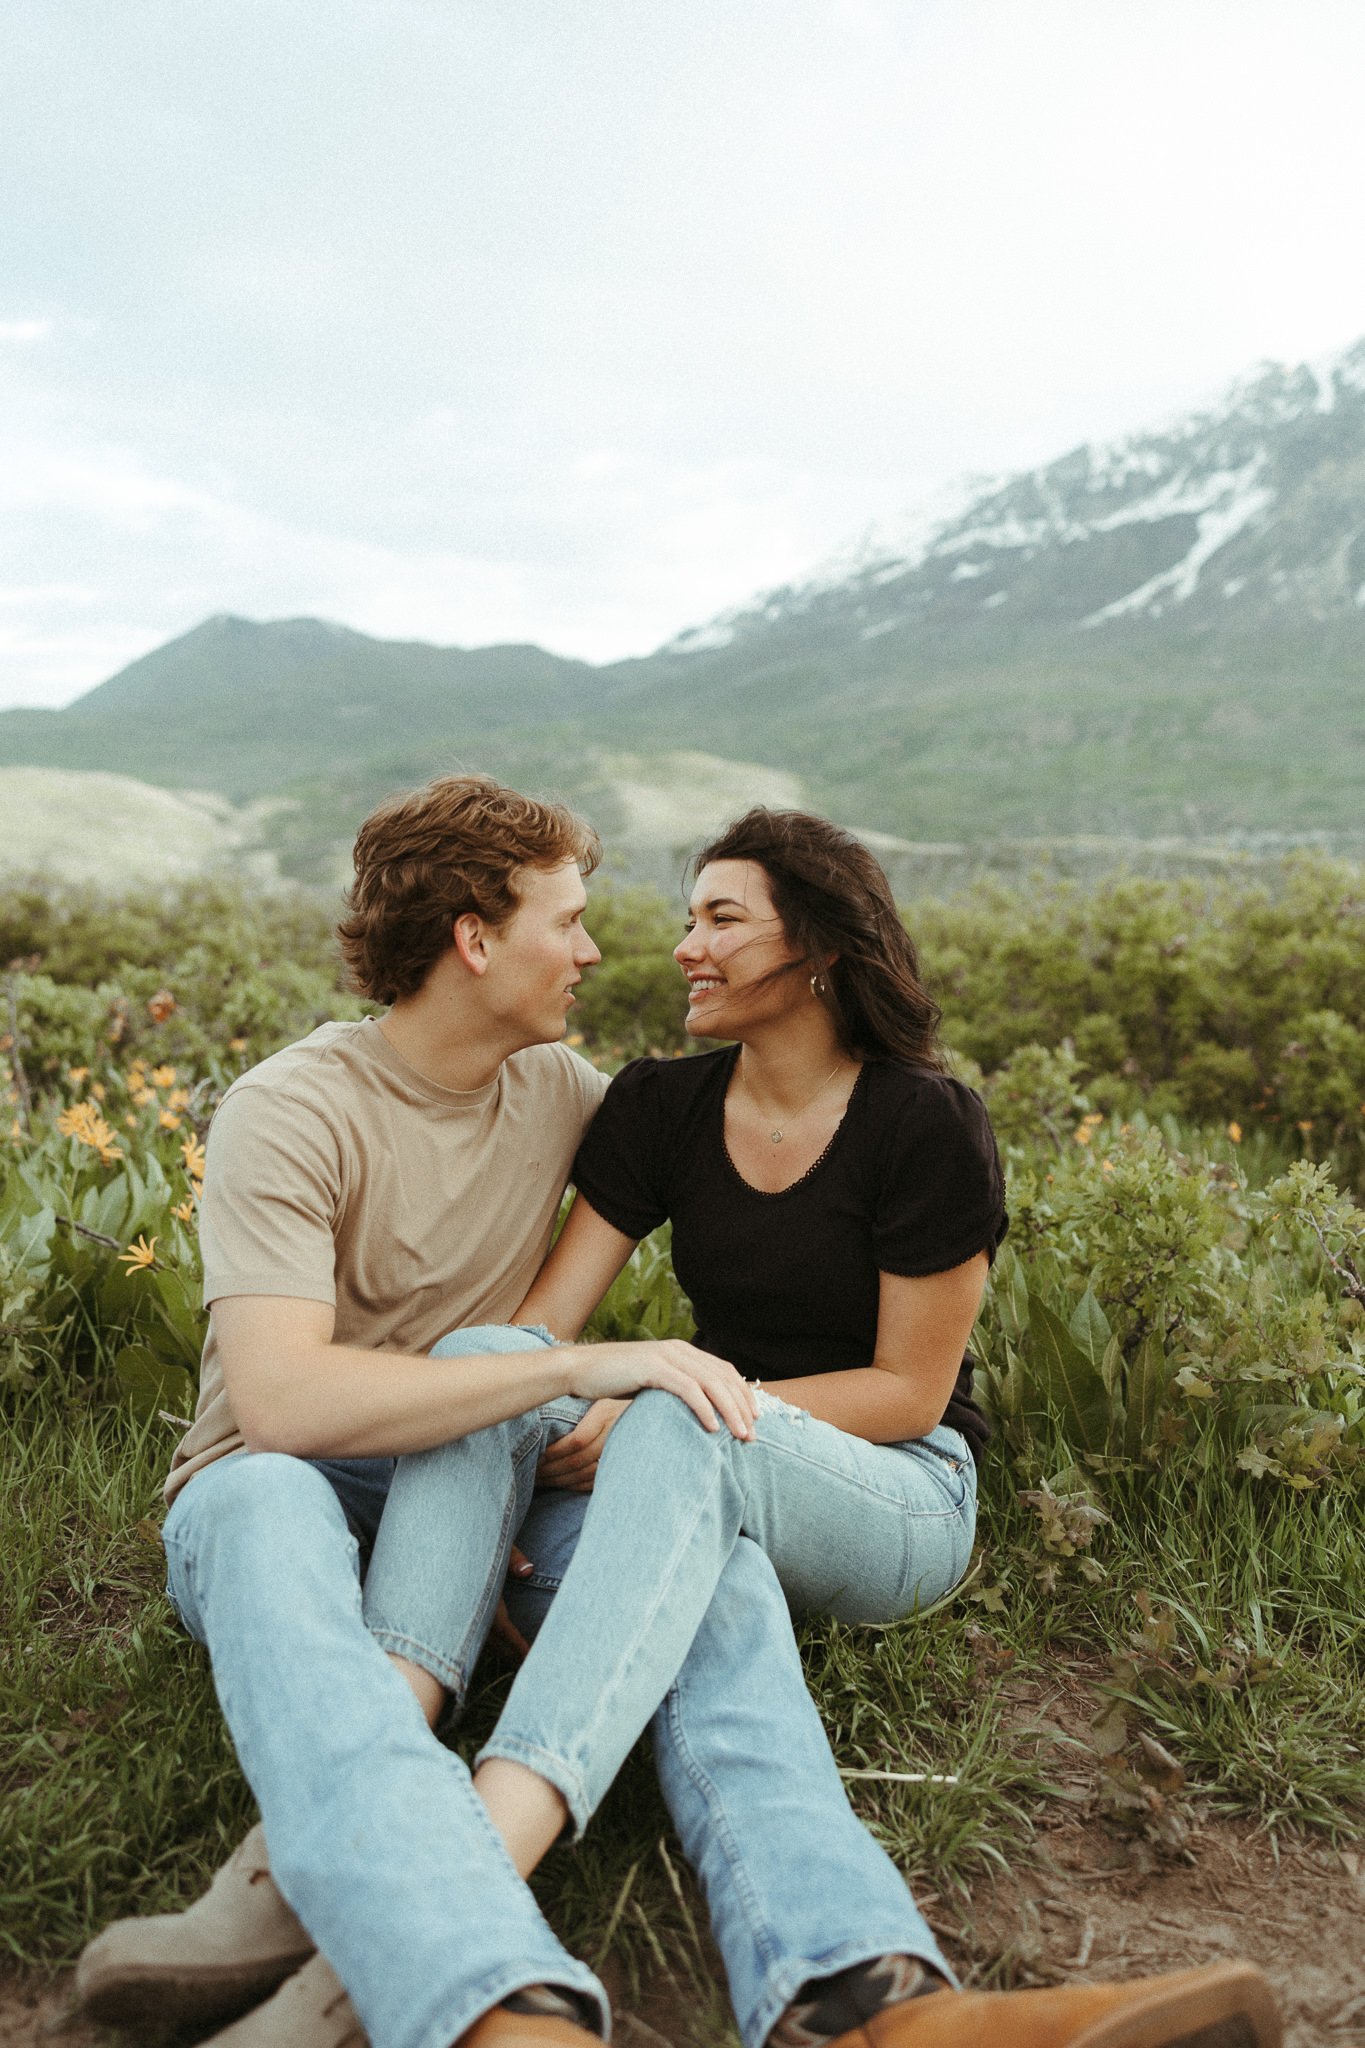 Spring-Provo-Canyon-Wildflowers-Engagement-Session-39